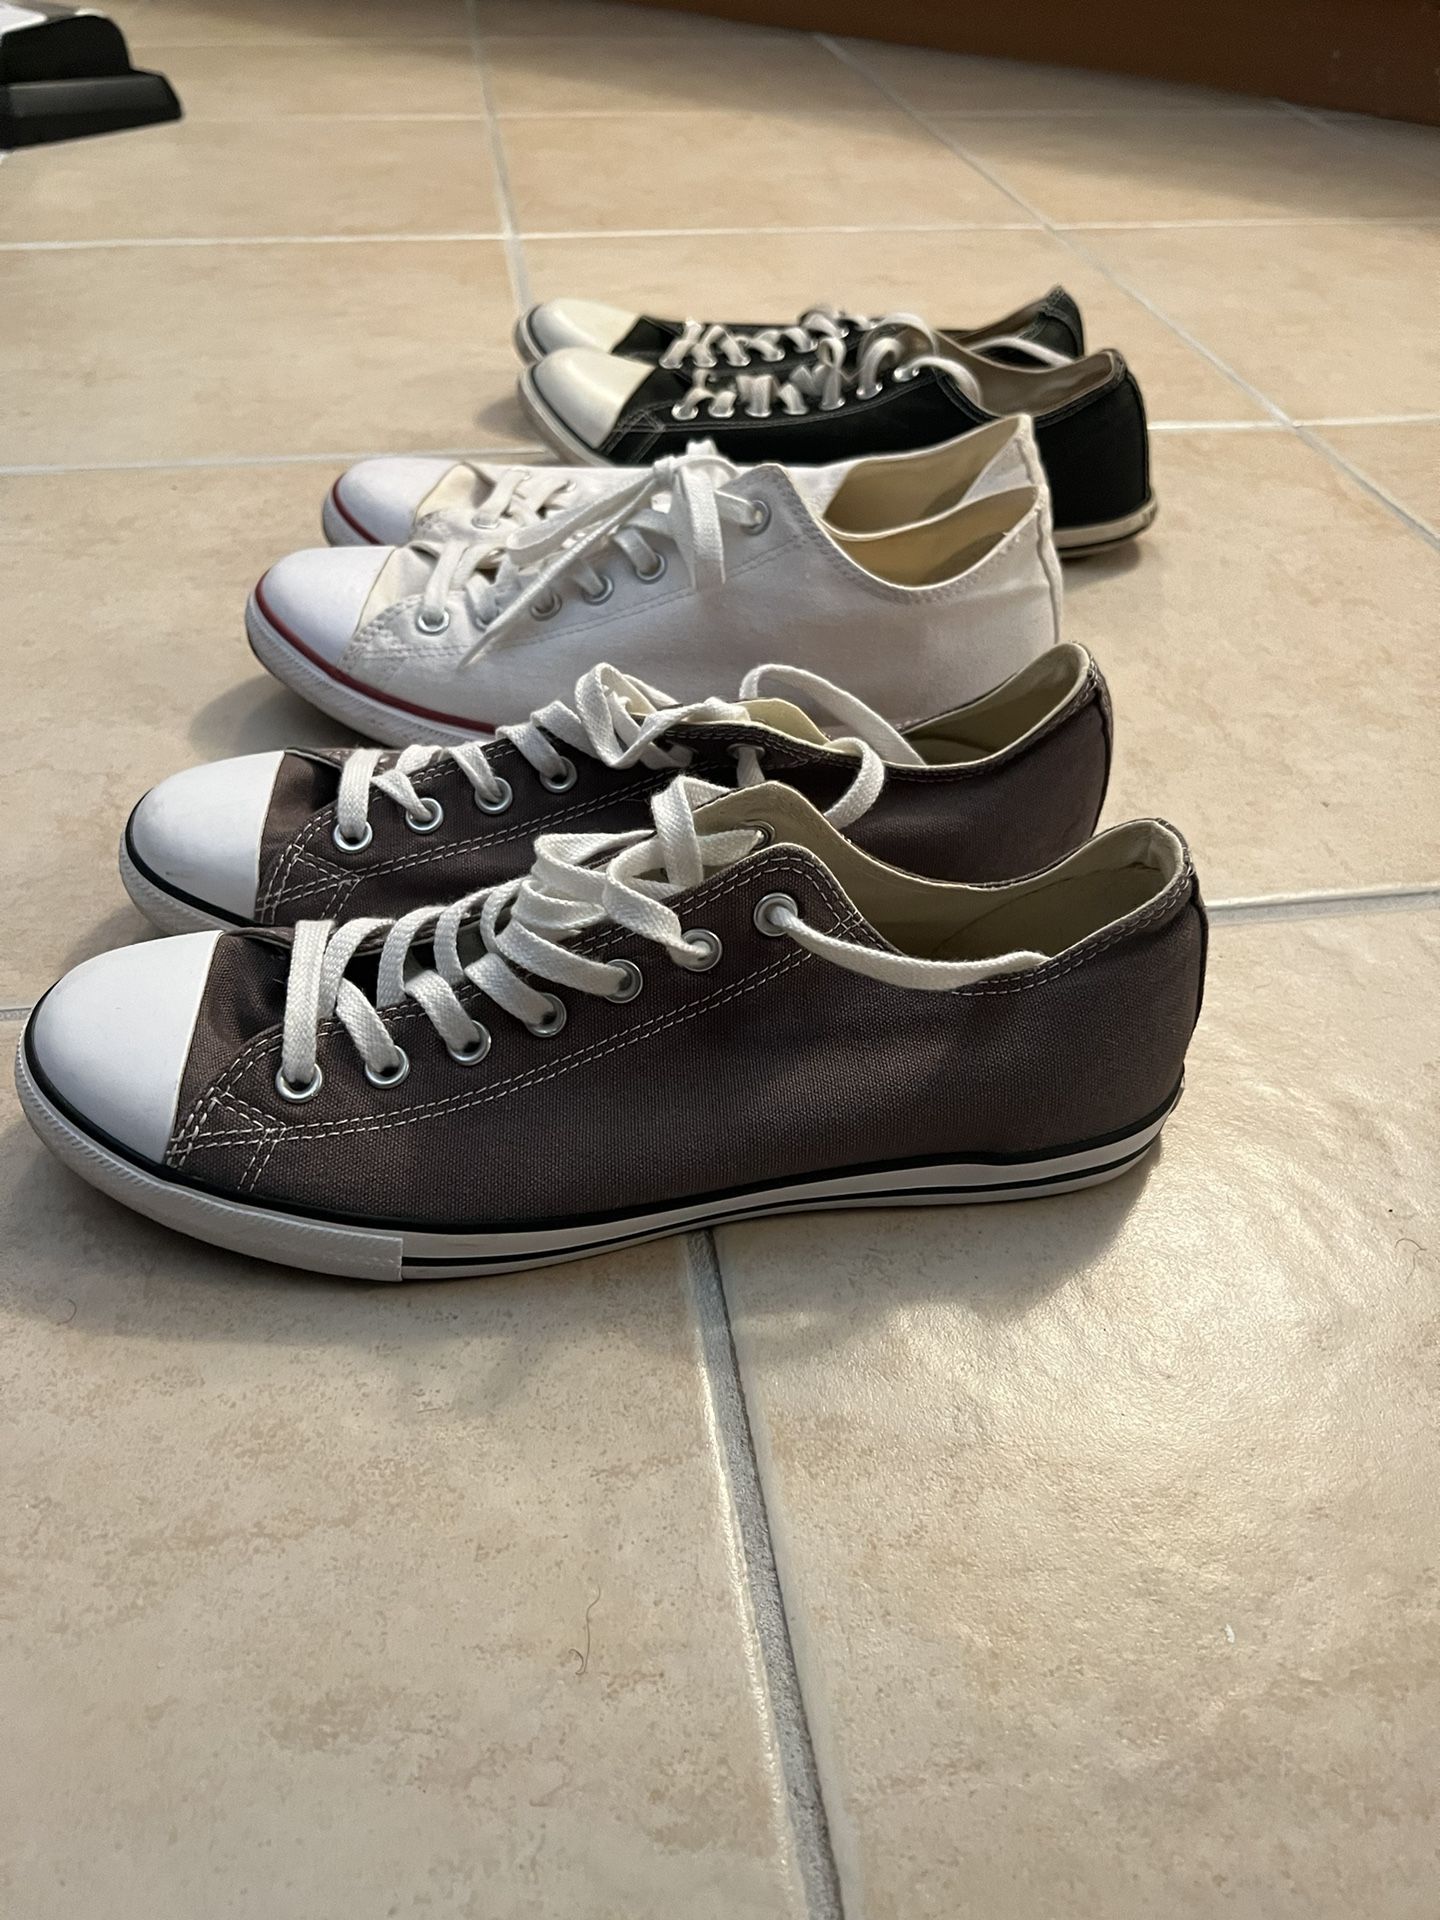 3 Pairs Converse Size 11